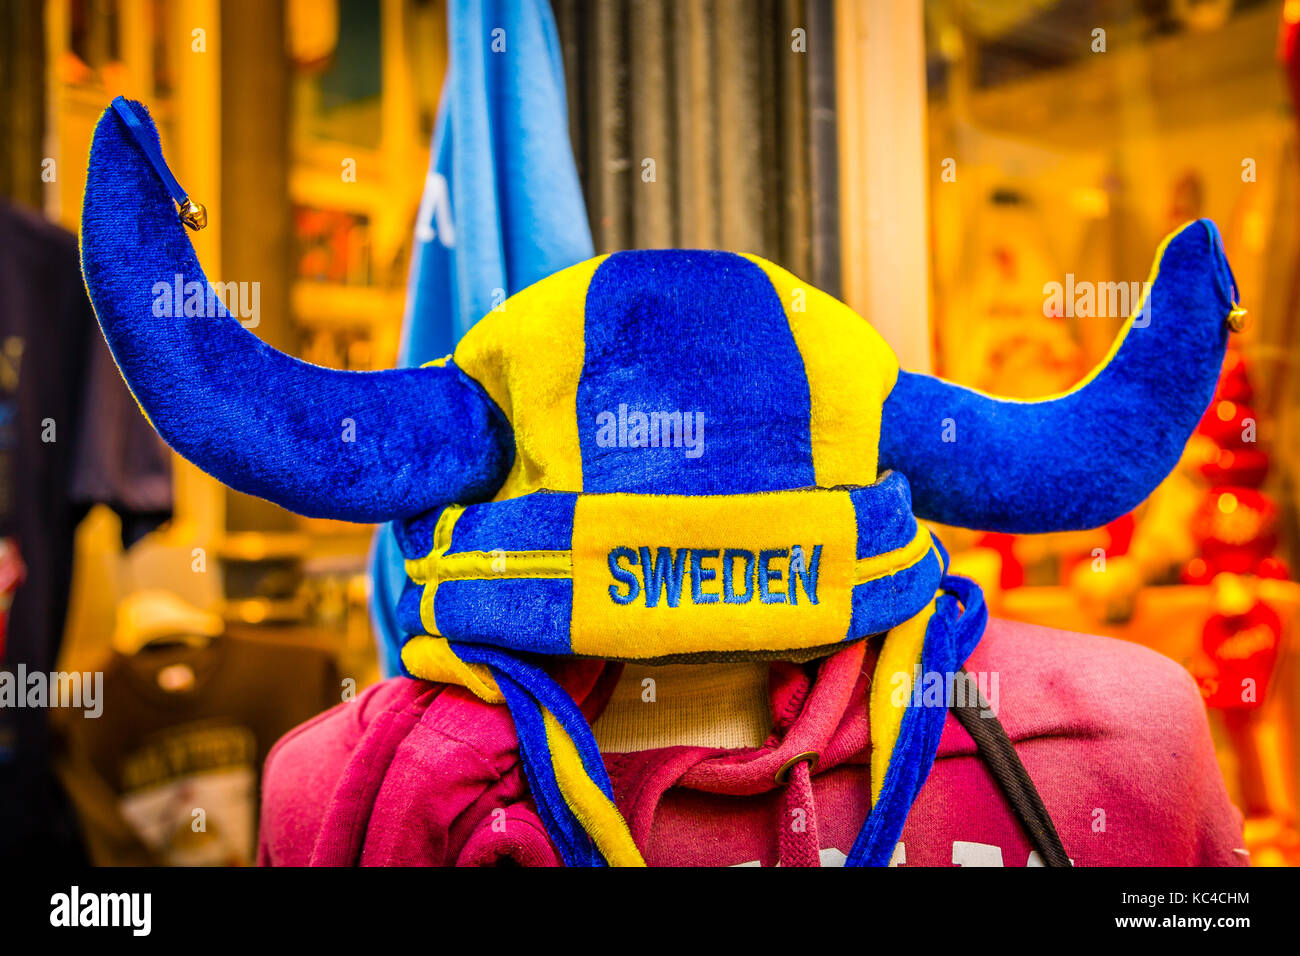 Blue and Yellow Soft Horned Swedish Hat Stock Photo